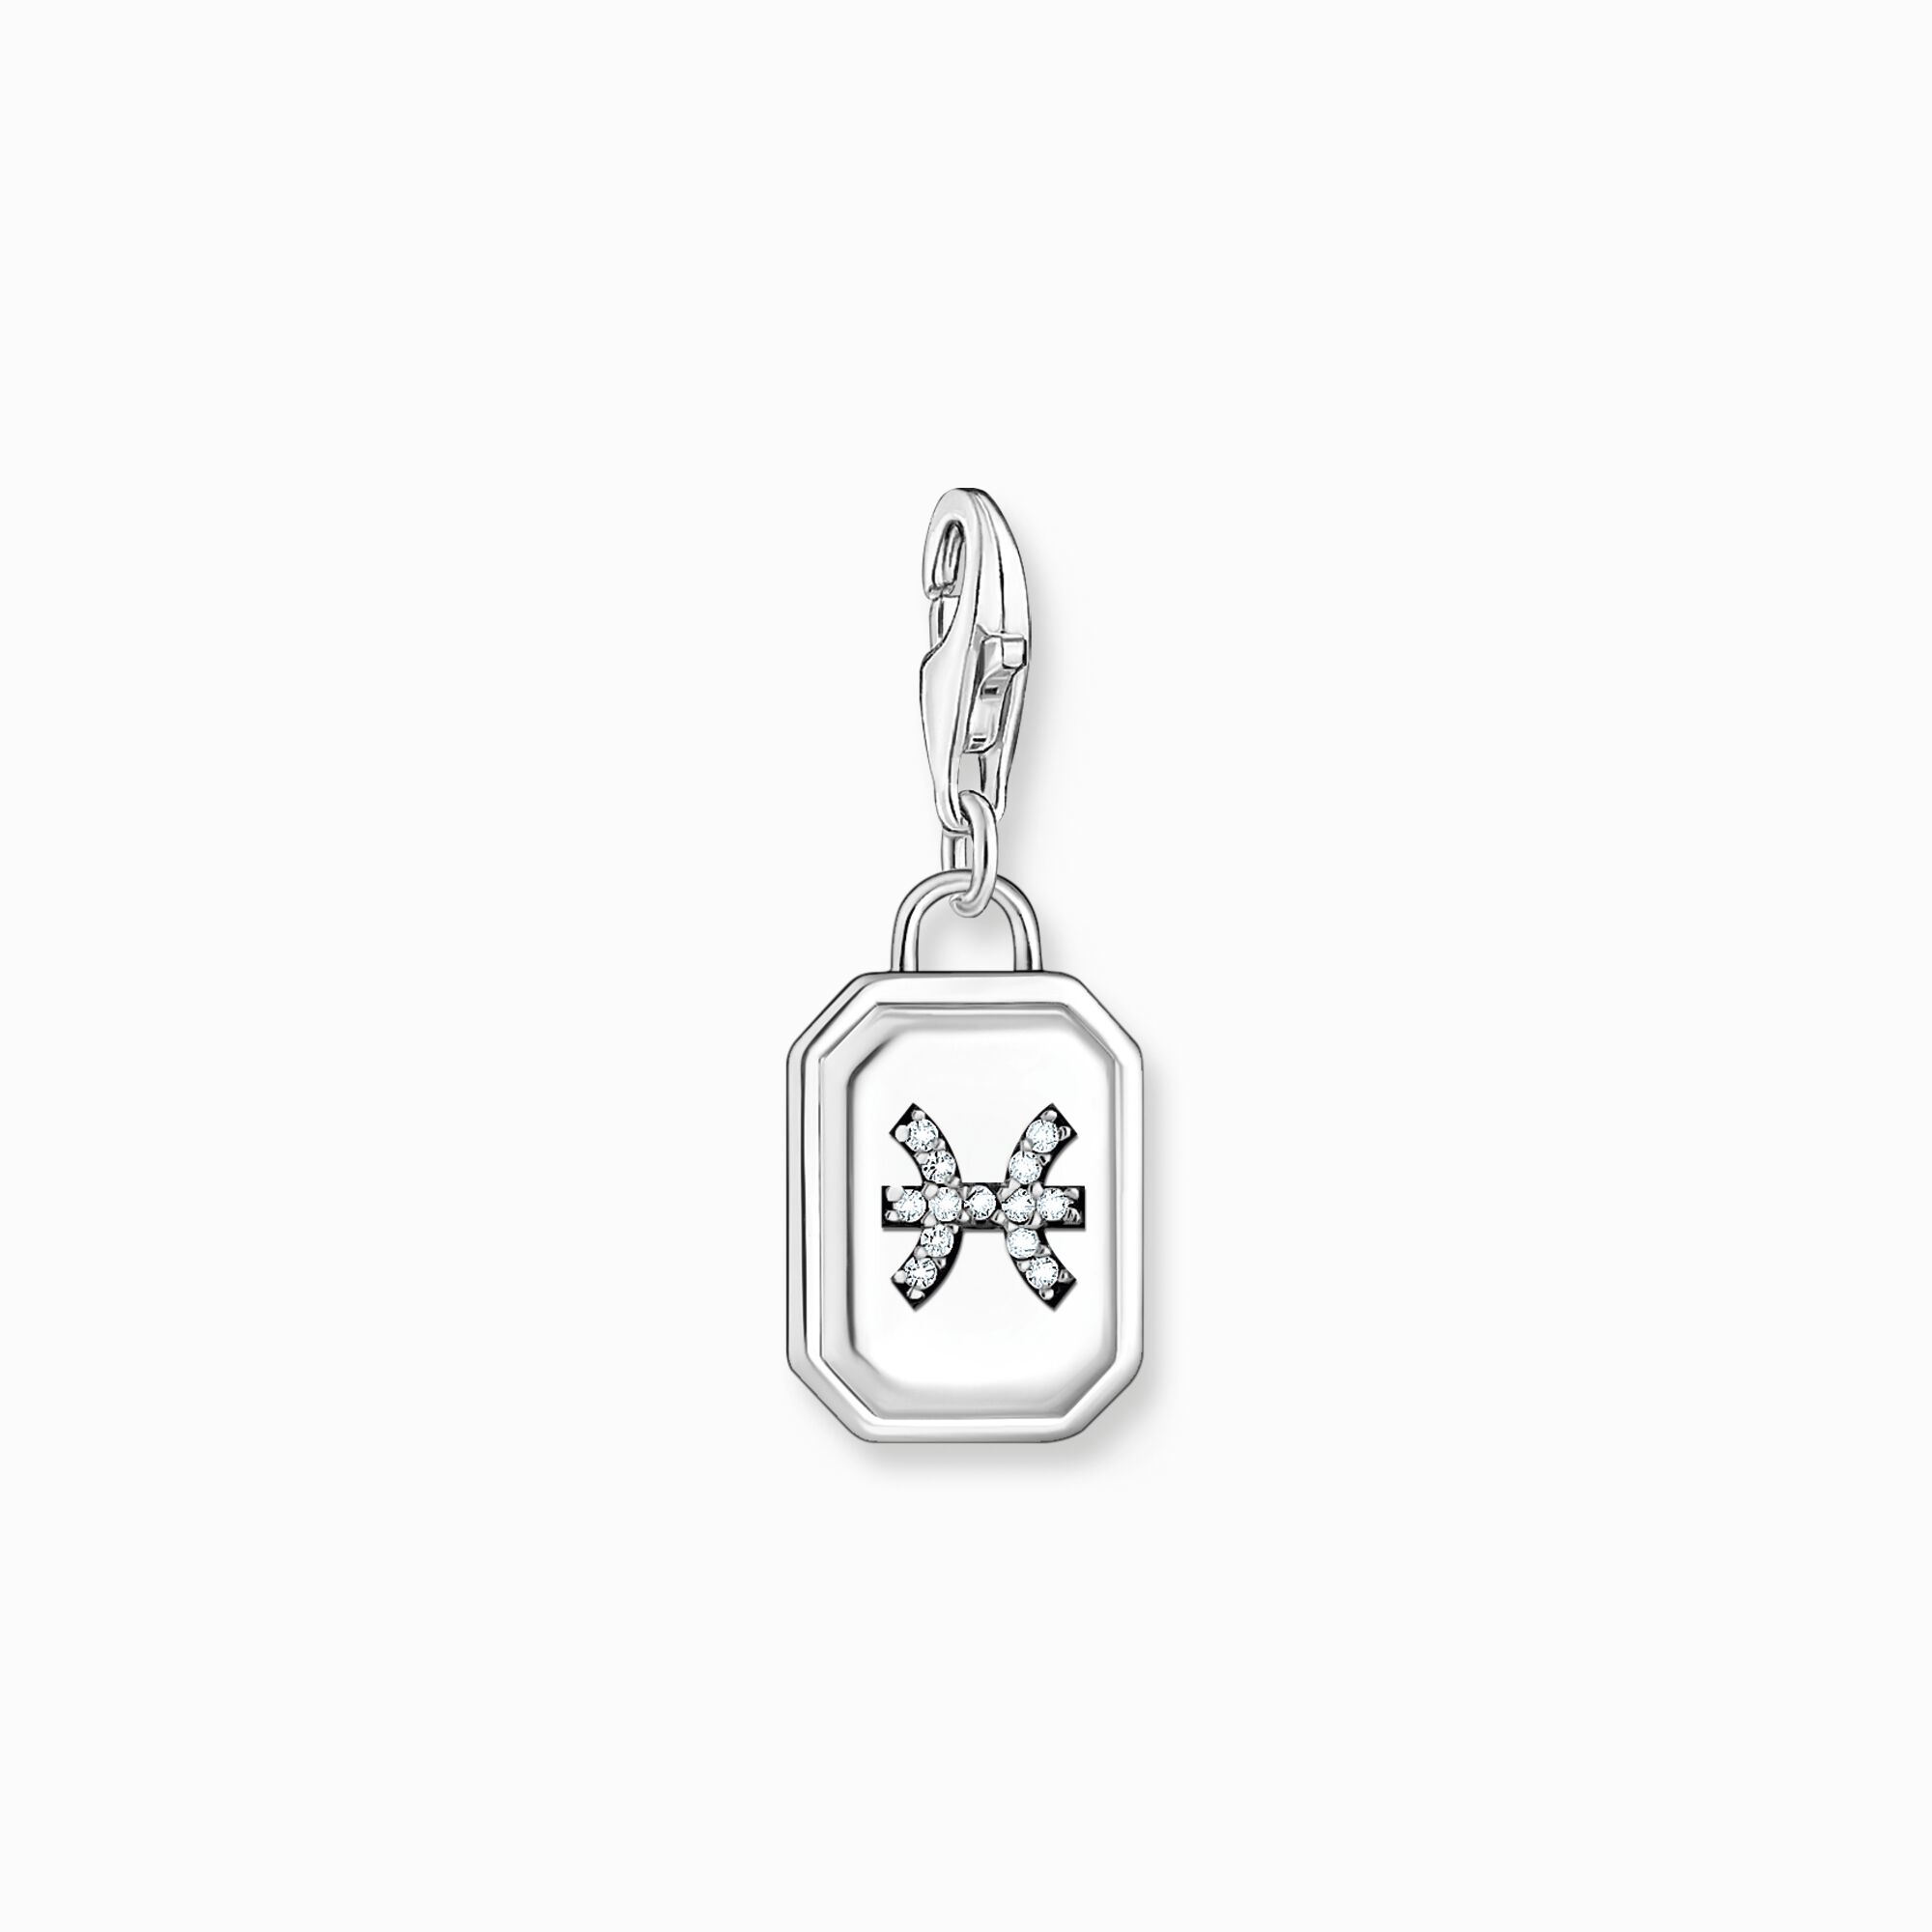 Silver charm pendant zodiac sign Pisces with zirconia from the Charm Club collection in the THOMAS SABO online store